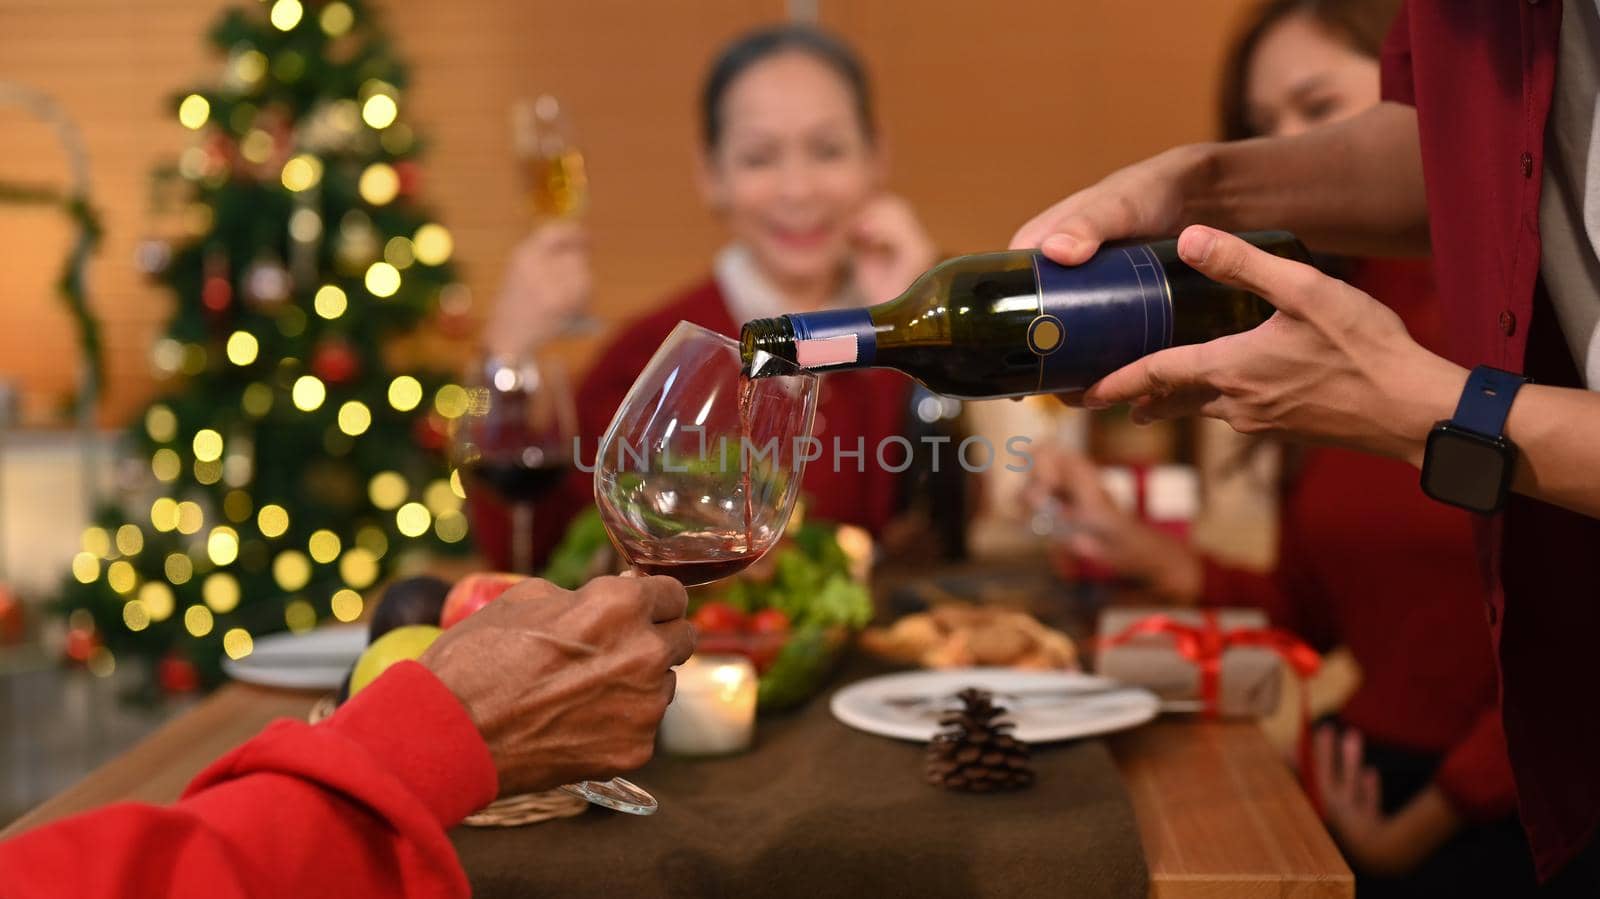 Man pouring wine to his grandparent while having Christmas dinner. Celebration, holidays and party concept.